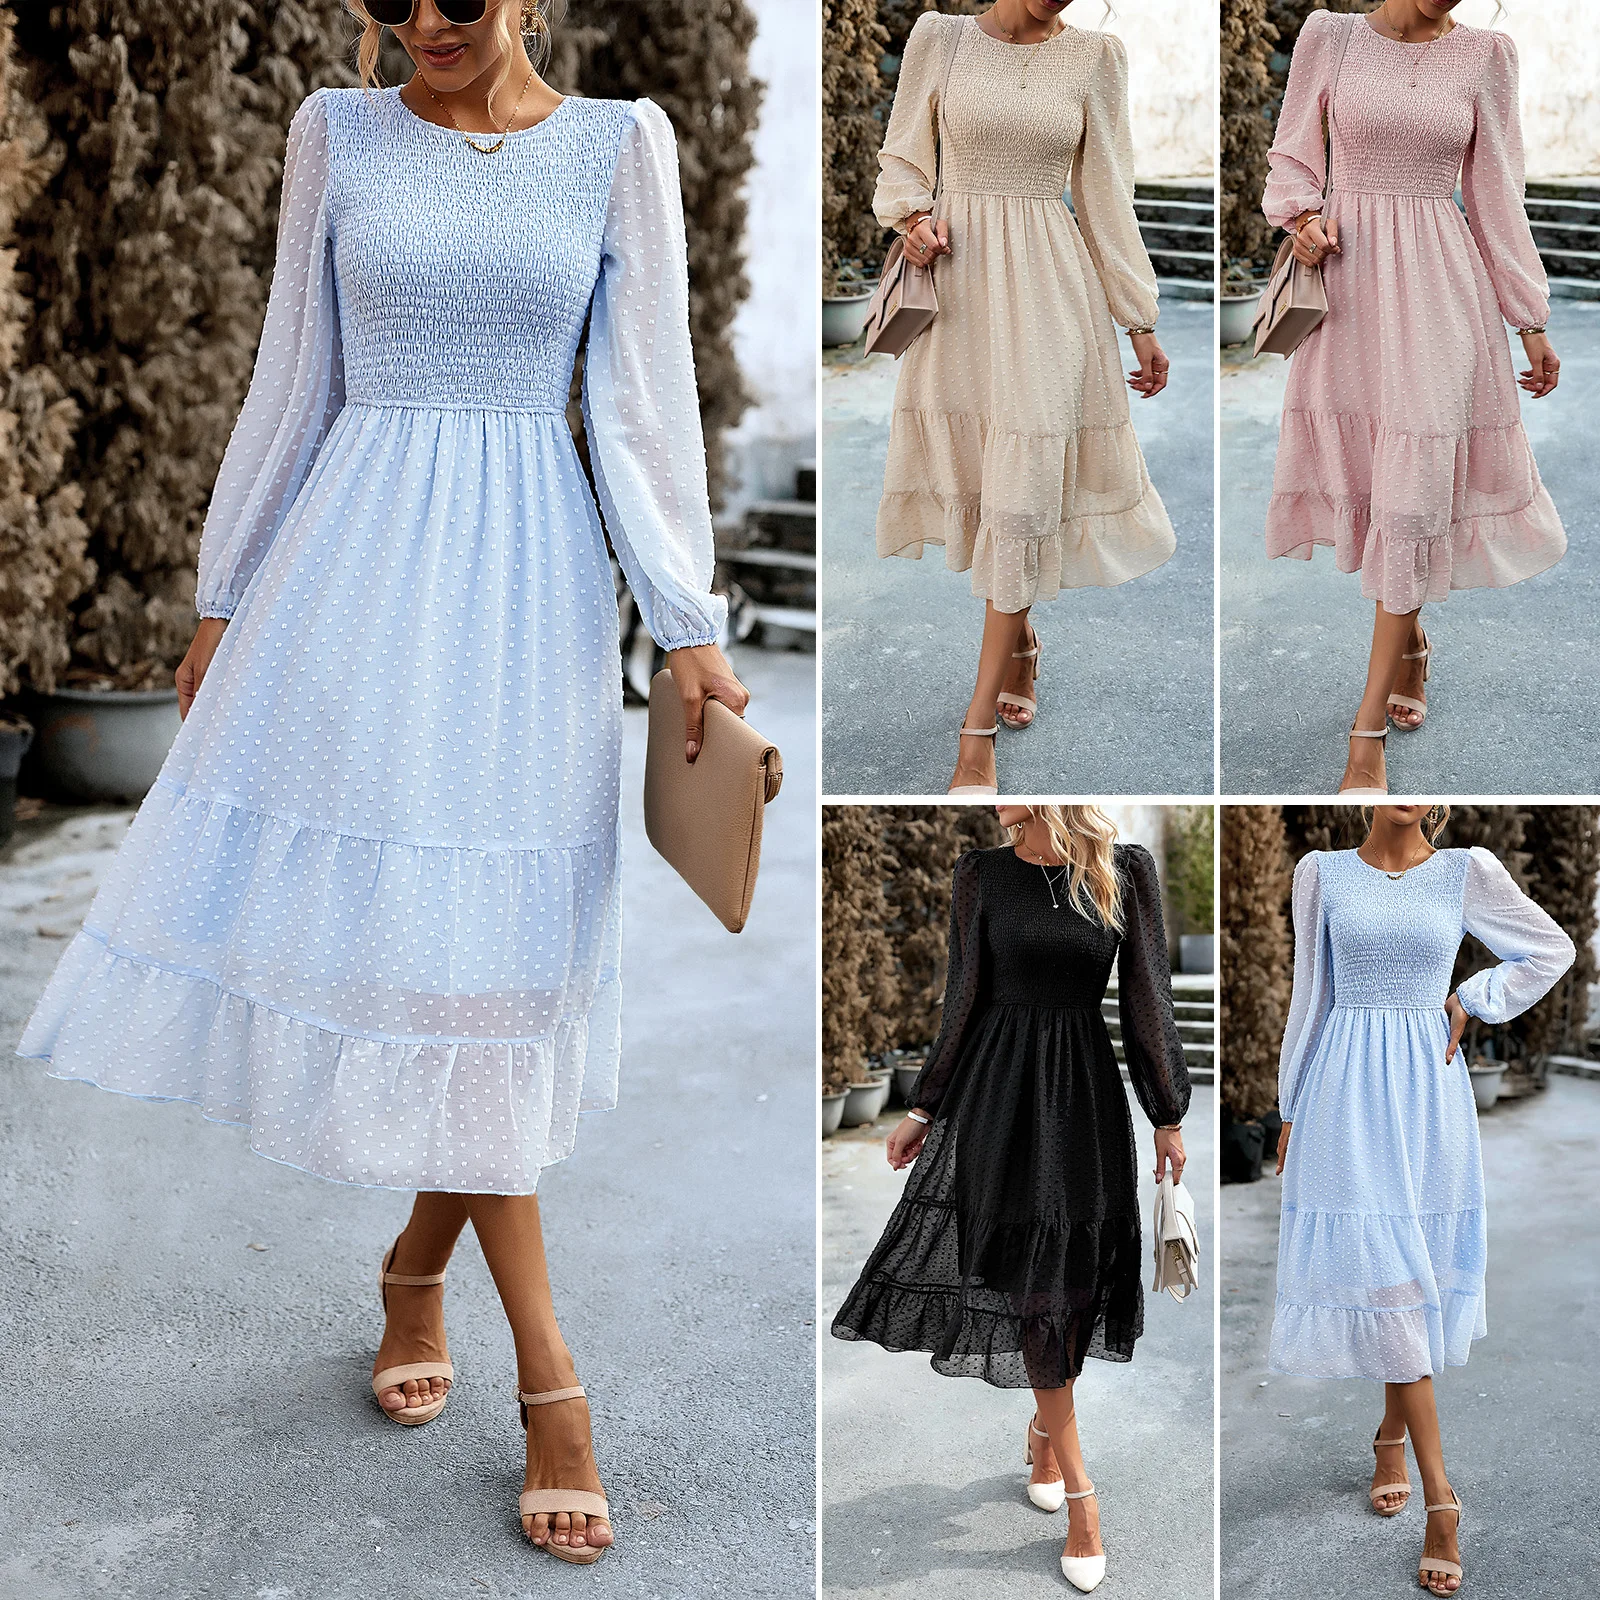 

Casual O Neck Puff Sleeves Dress Loose Elegant Solid Polka Dot Jacquard Long Skirts Simple High Waist Tunics Evening Party Frock